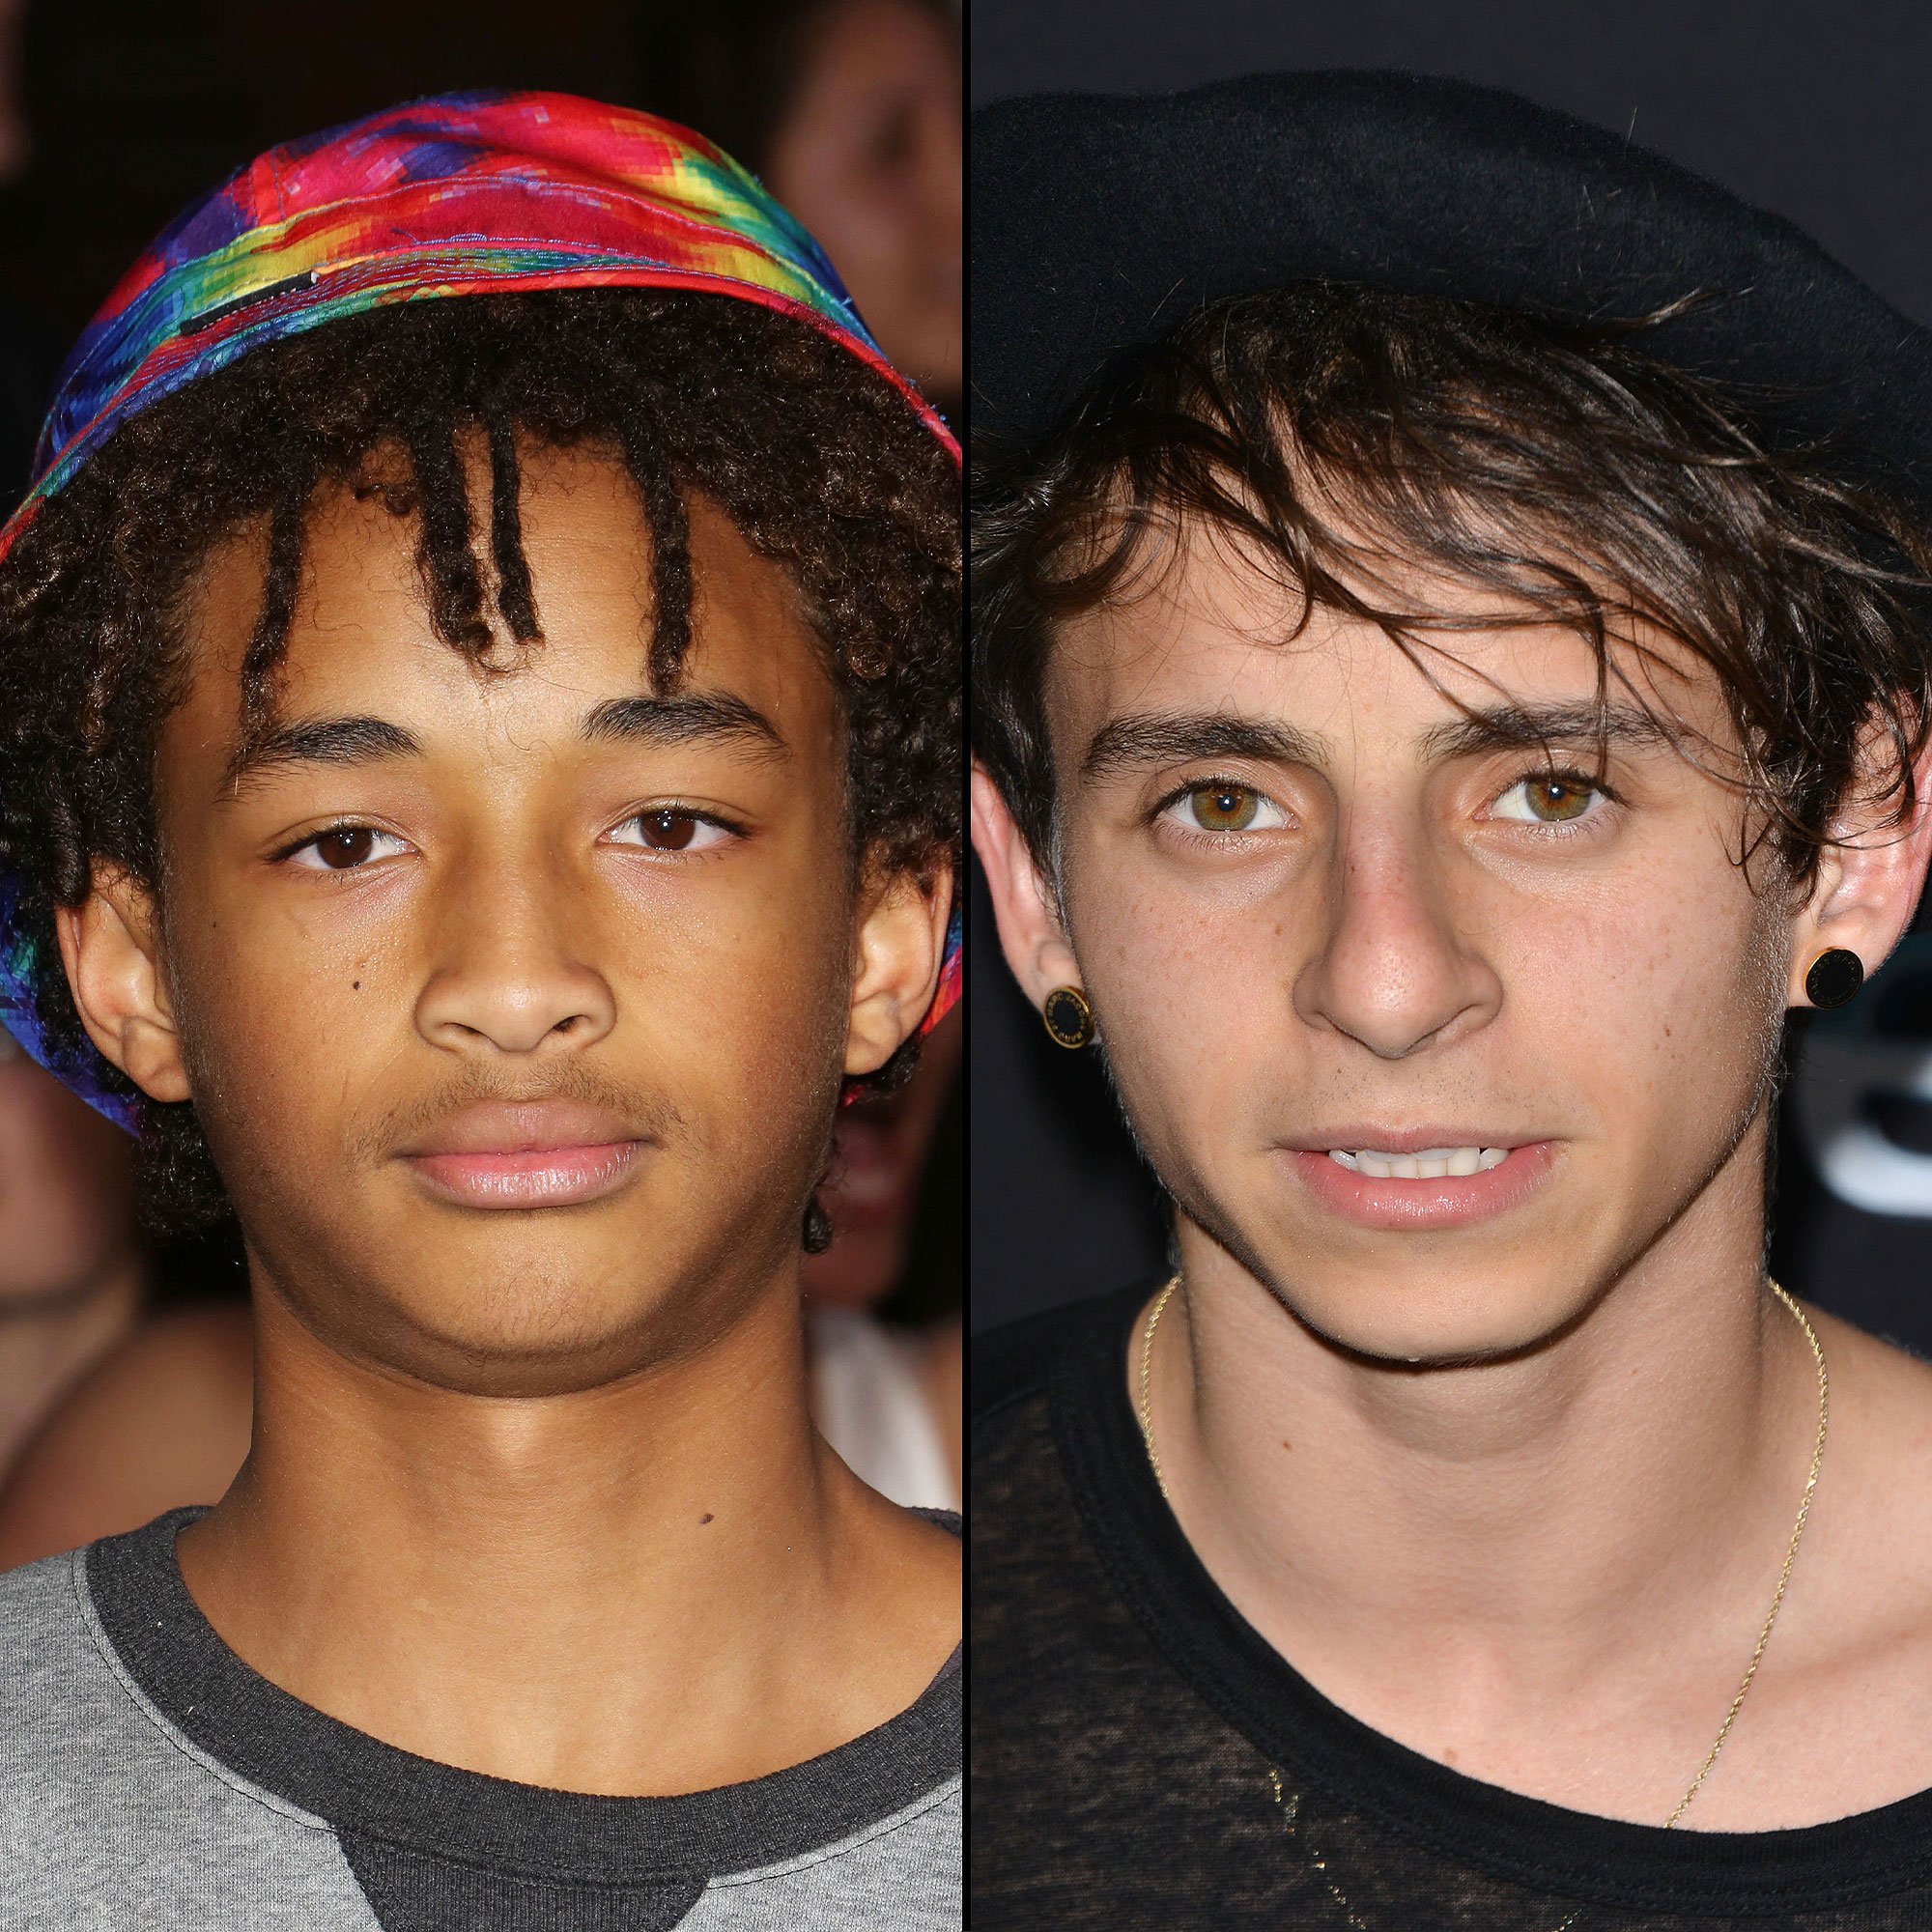 Jaden Smith, Moises Arias Go Out Together After Shirtless Bed Photos photo